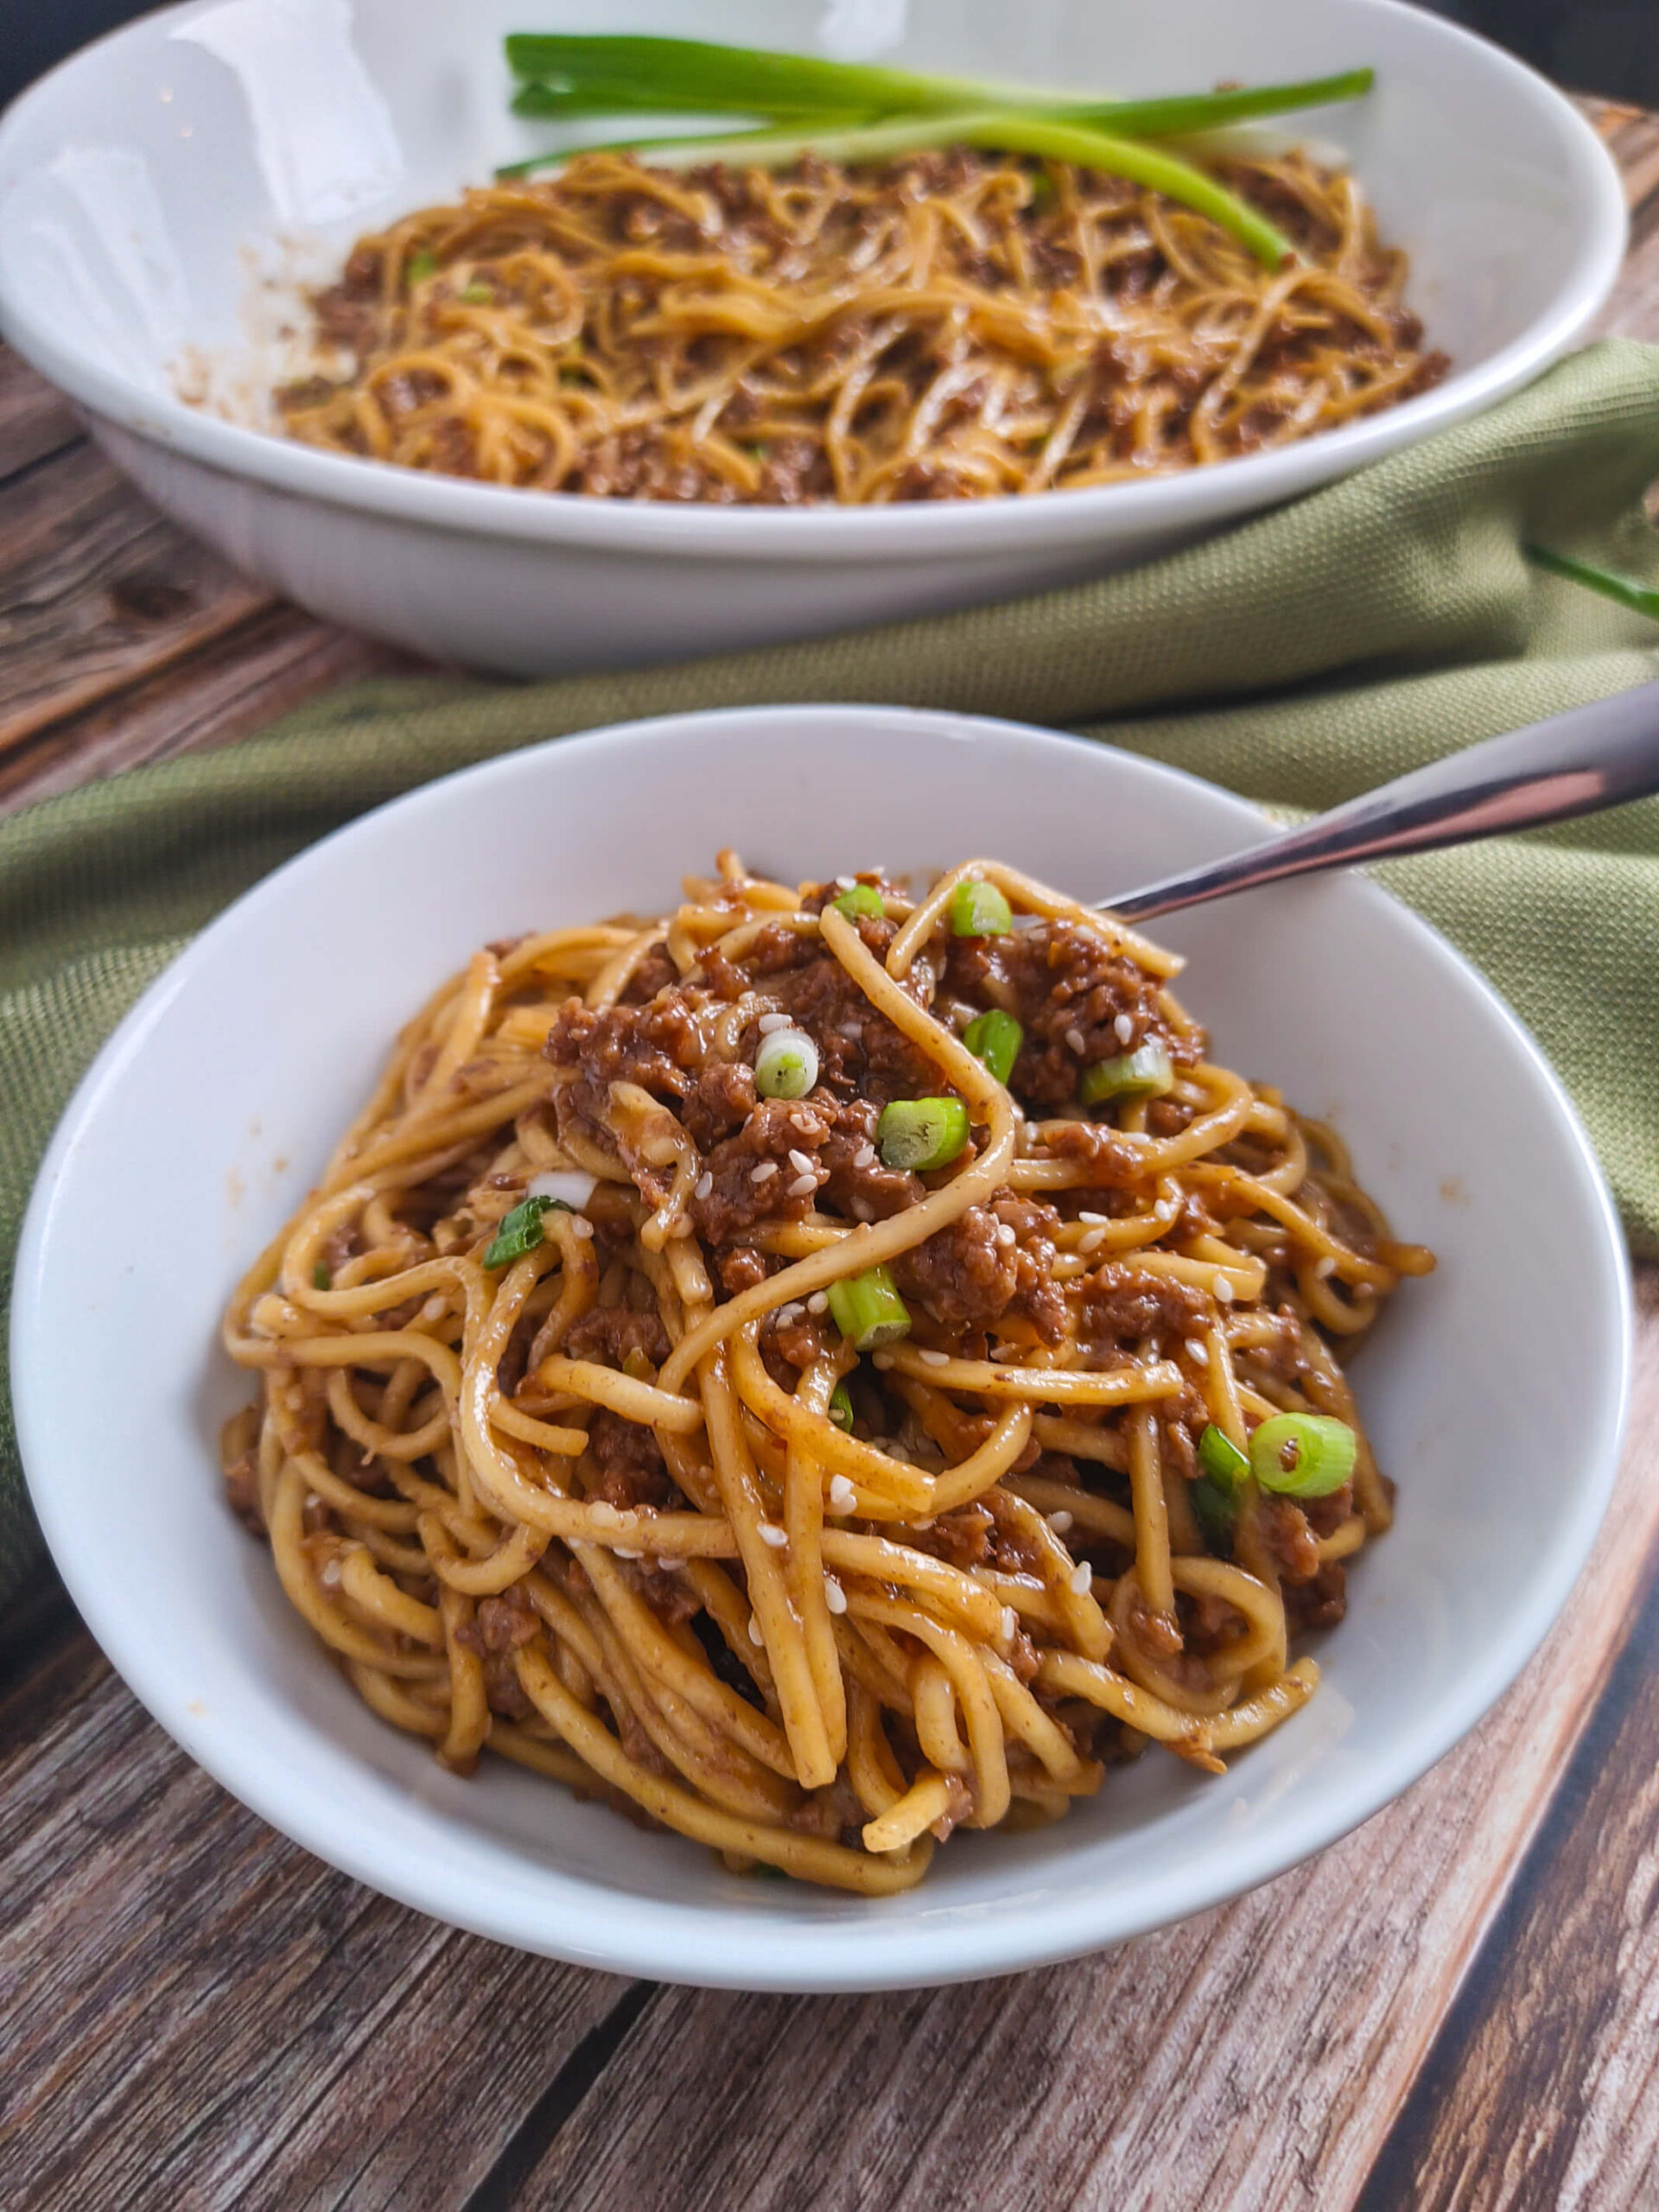 SERVE THE MONGOLIAN GROUND BEEF